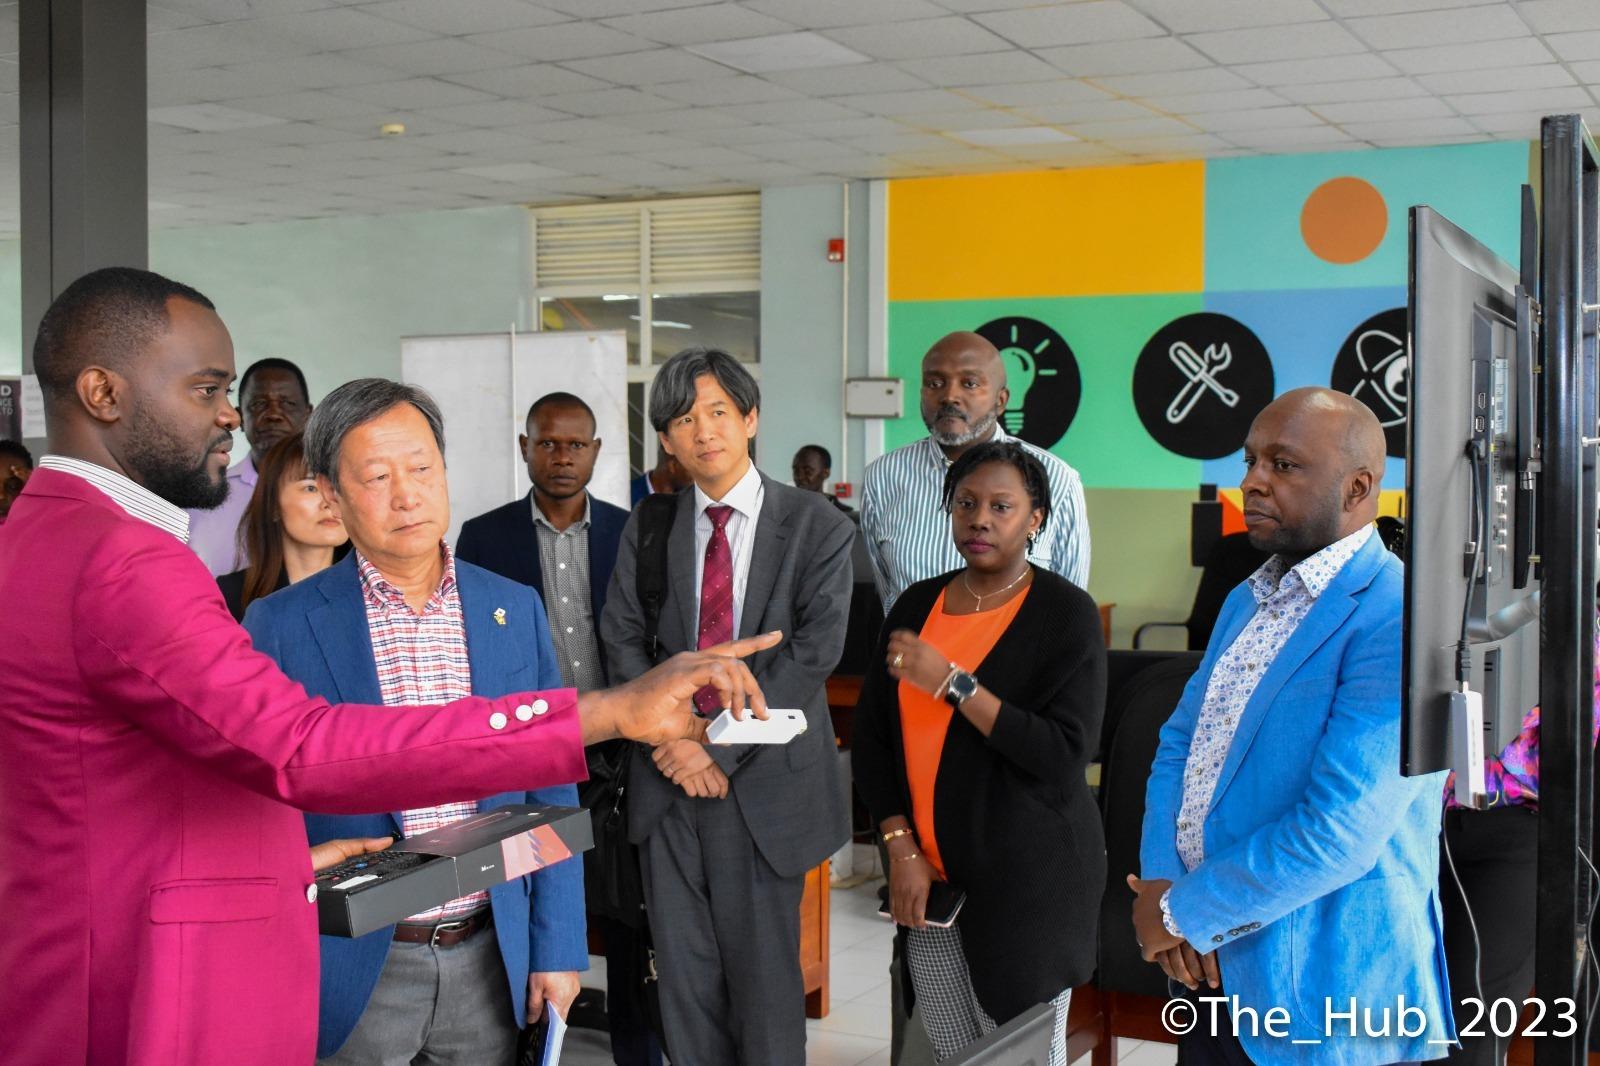 Executive Vice President of the Japan International Cooperation Agency (JICA), Dr. Junichi Yamada (center) and Cente-Tech CTO, Peter Kahiigi (right) interact with an ICT innovator.